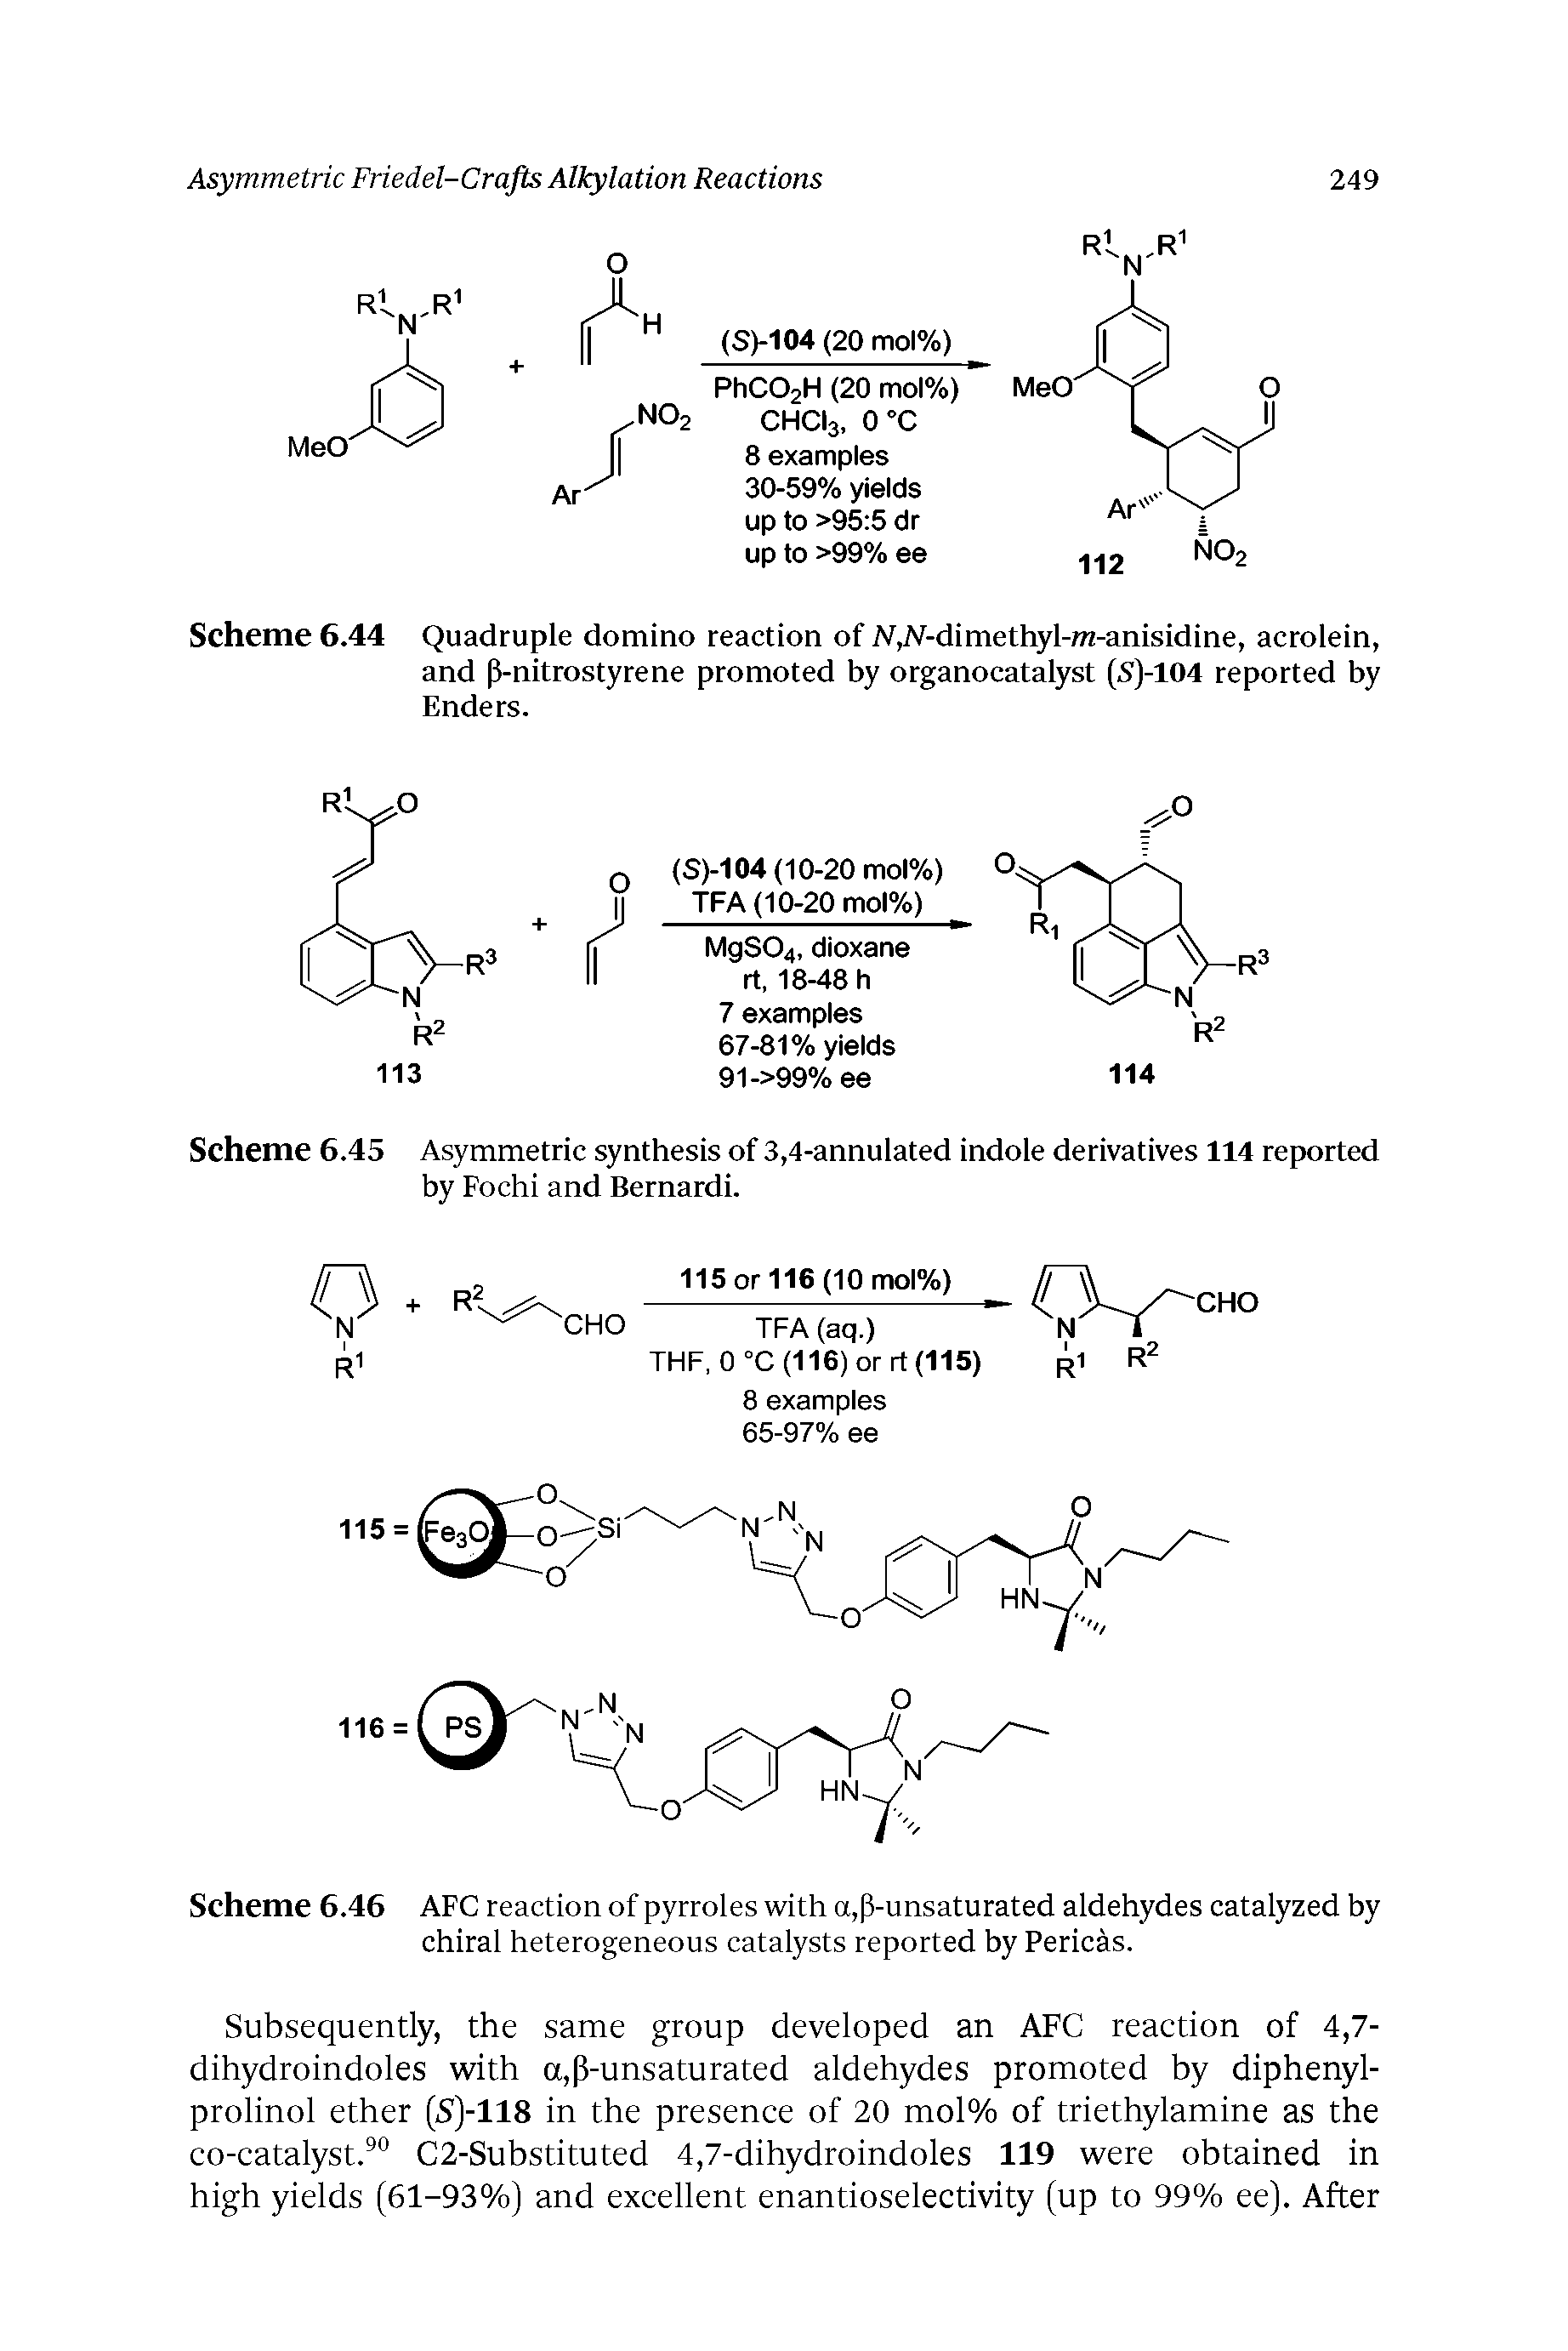 Scheme 6.45 Asymmetric synthesis of 3,4-annulated indole derivatives 114 reported by Fochi and Bernardi.